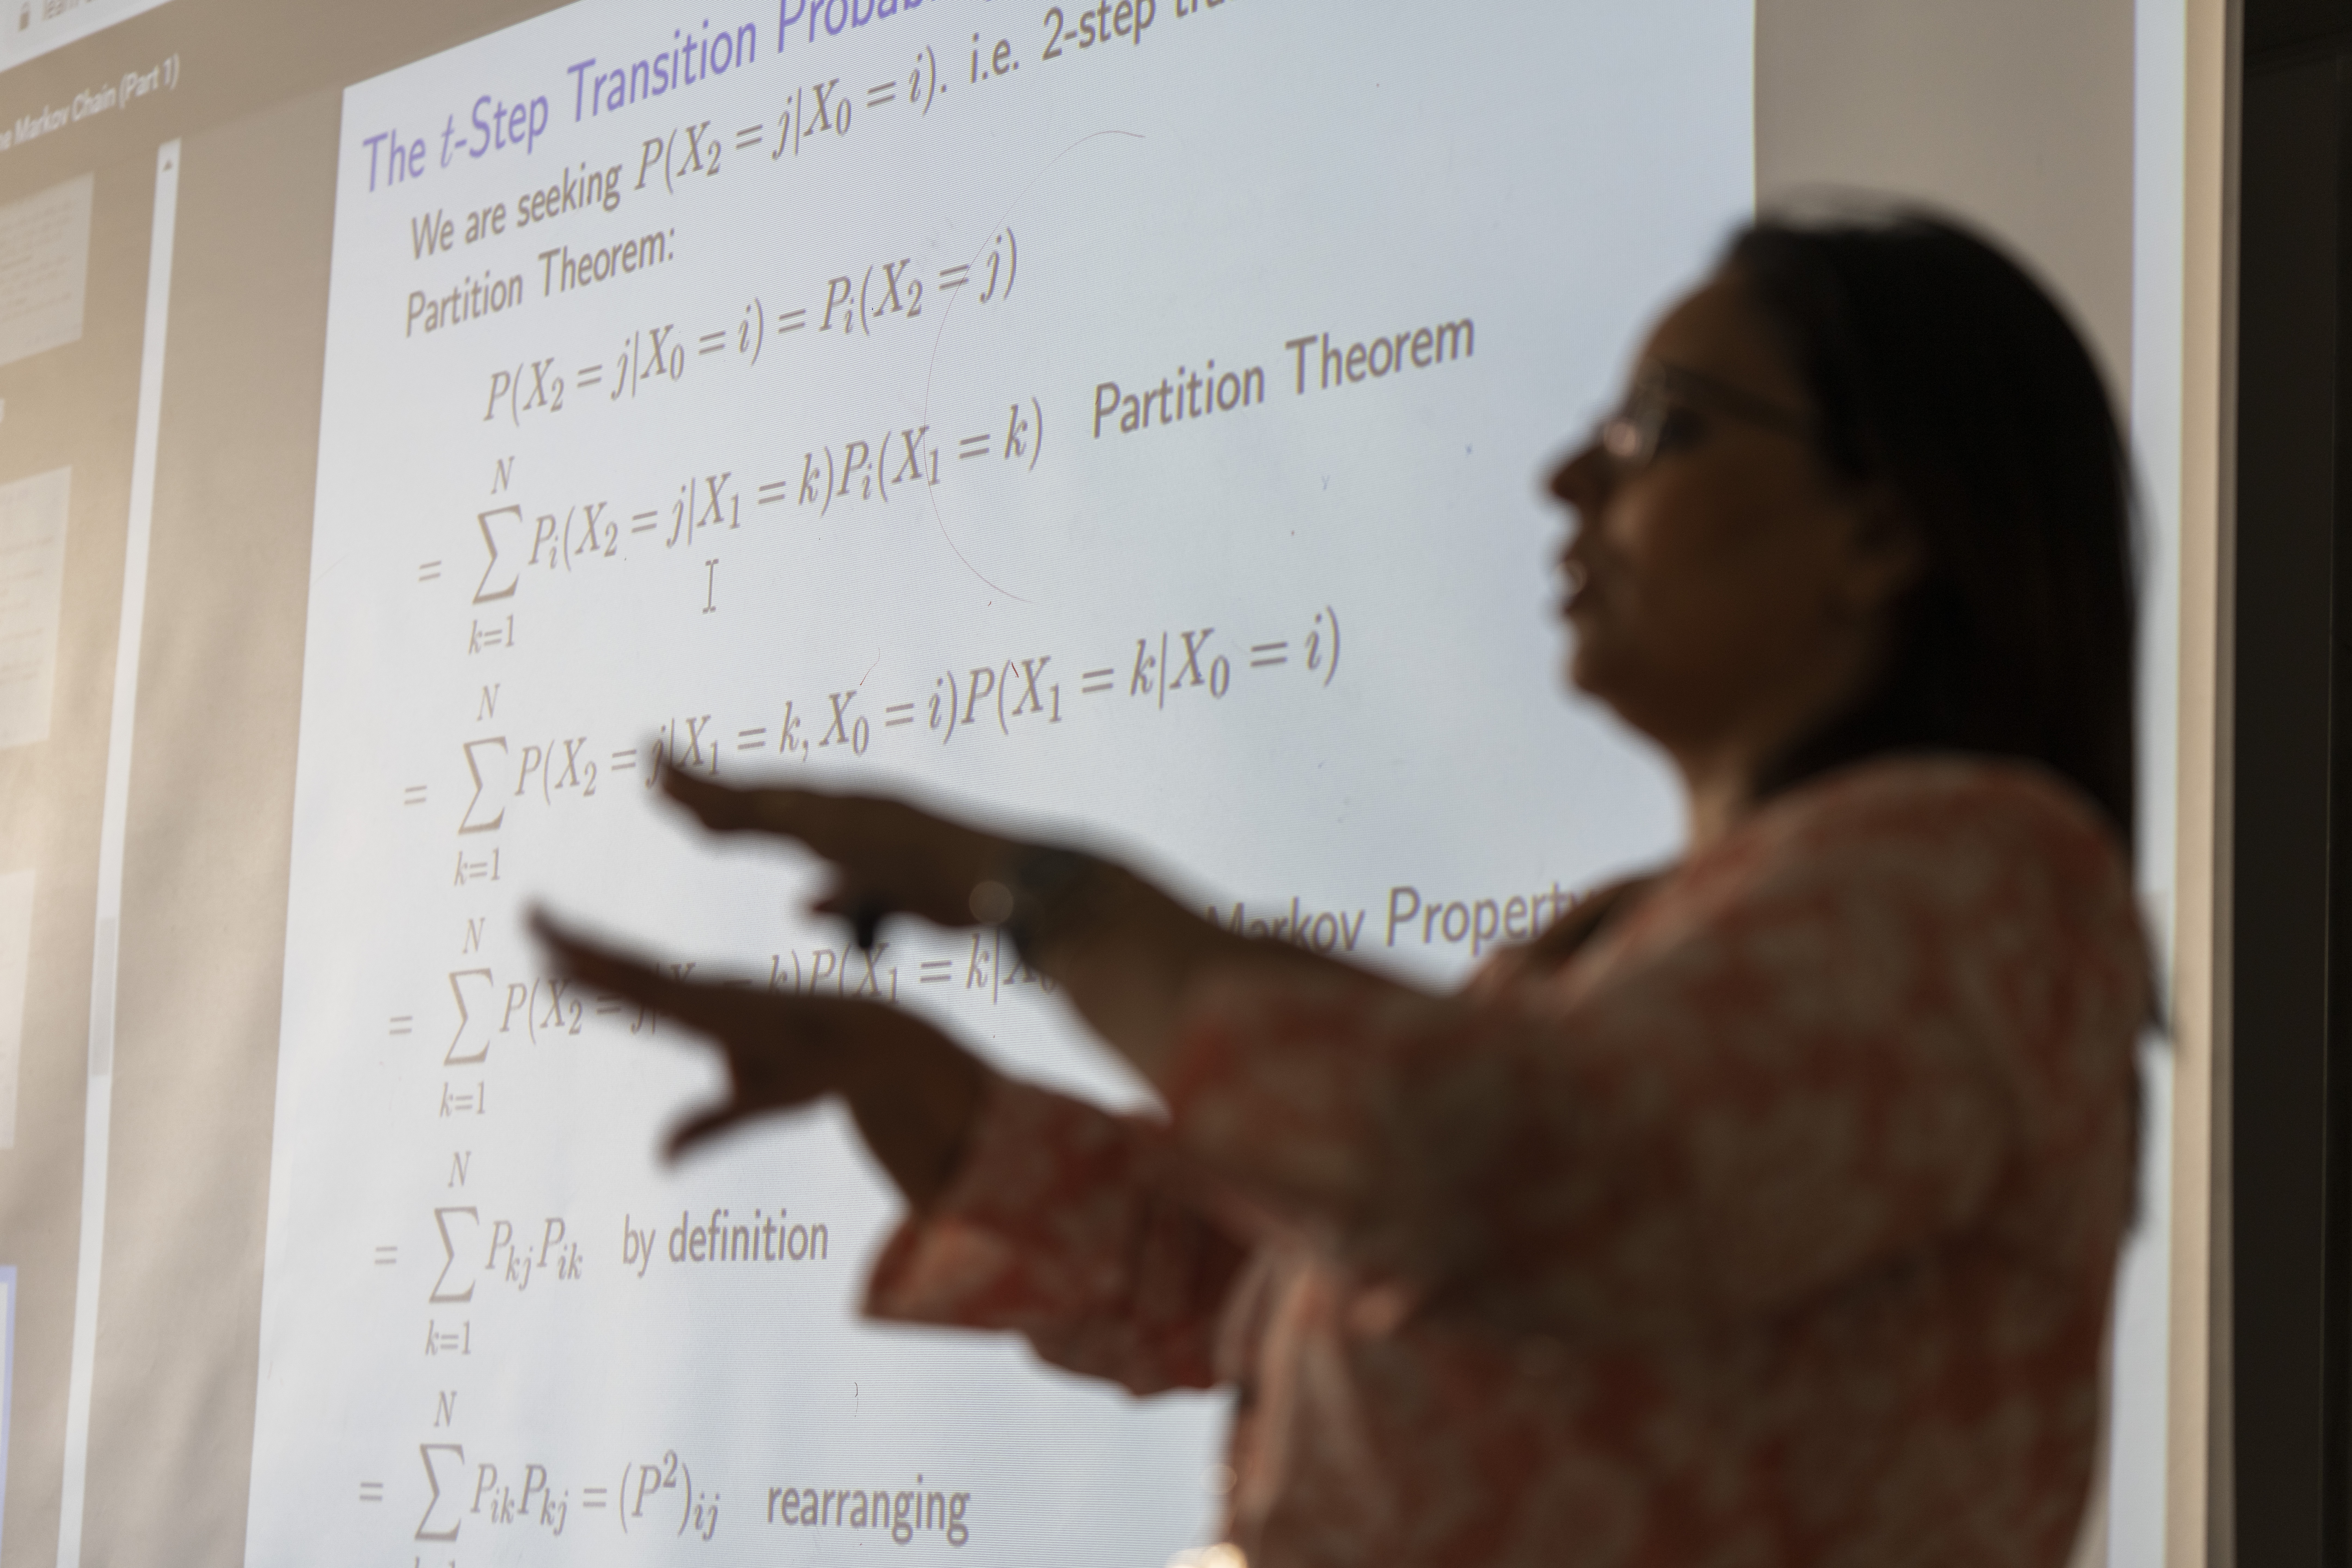 Faculty explaining equations in classroom